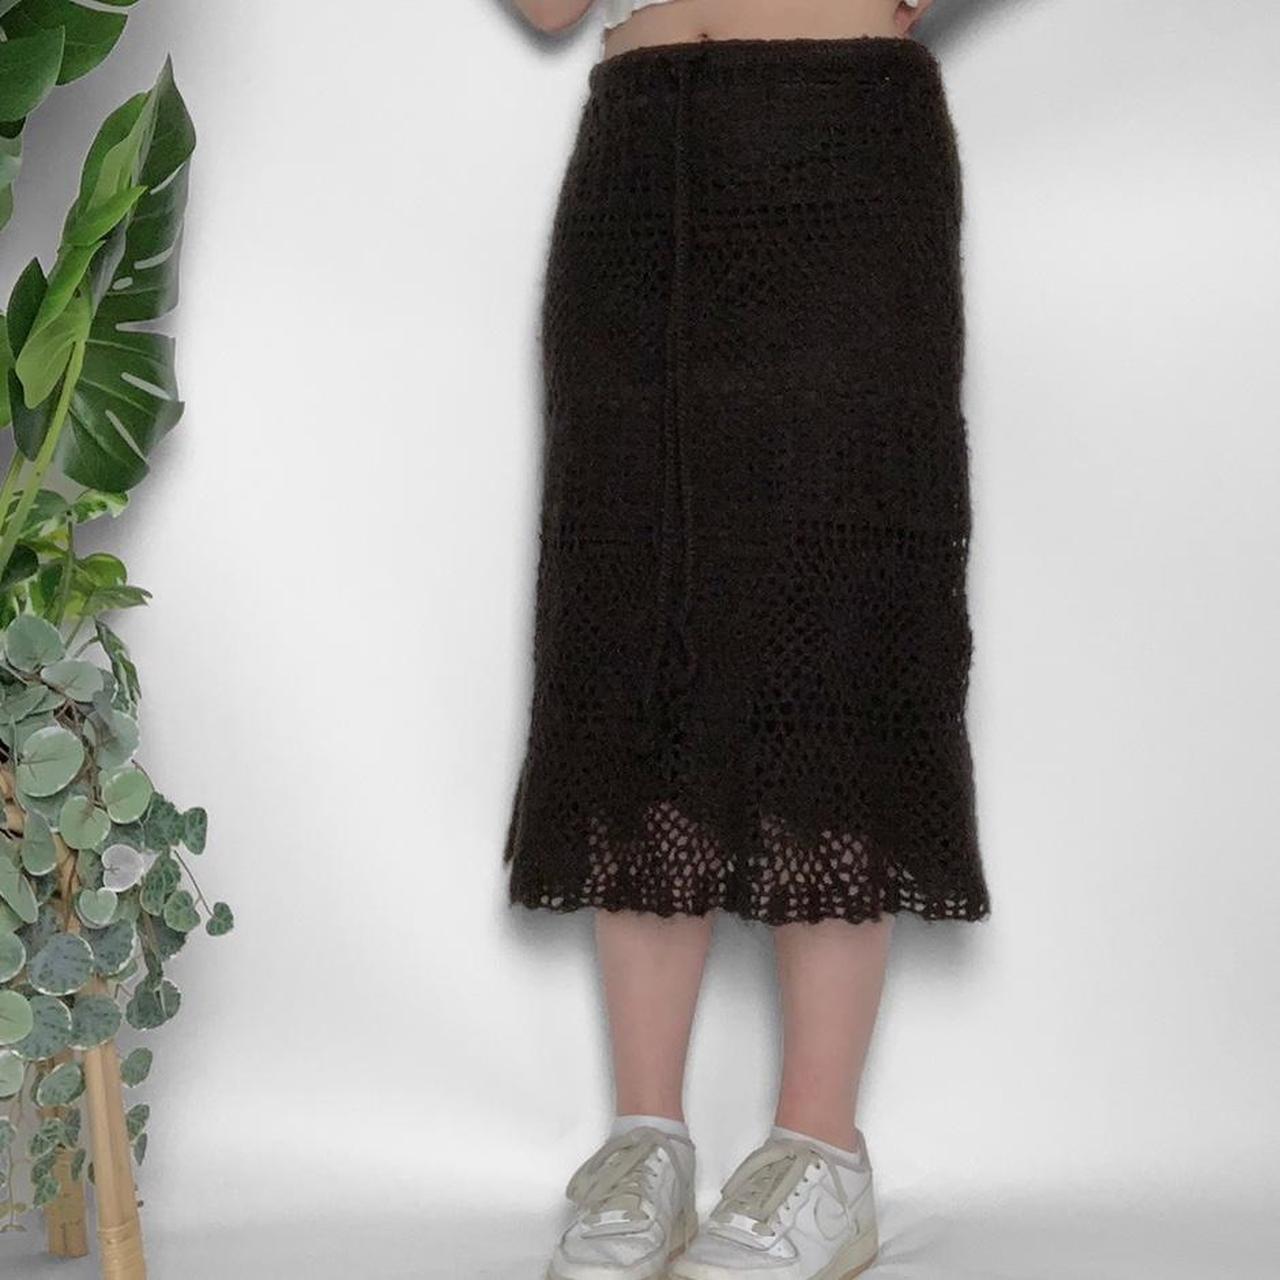 French vintage 90s chocolate brown crochet knit midi skirt